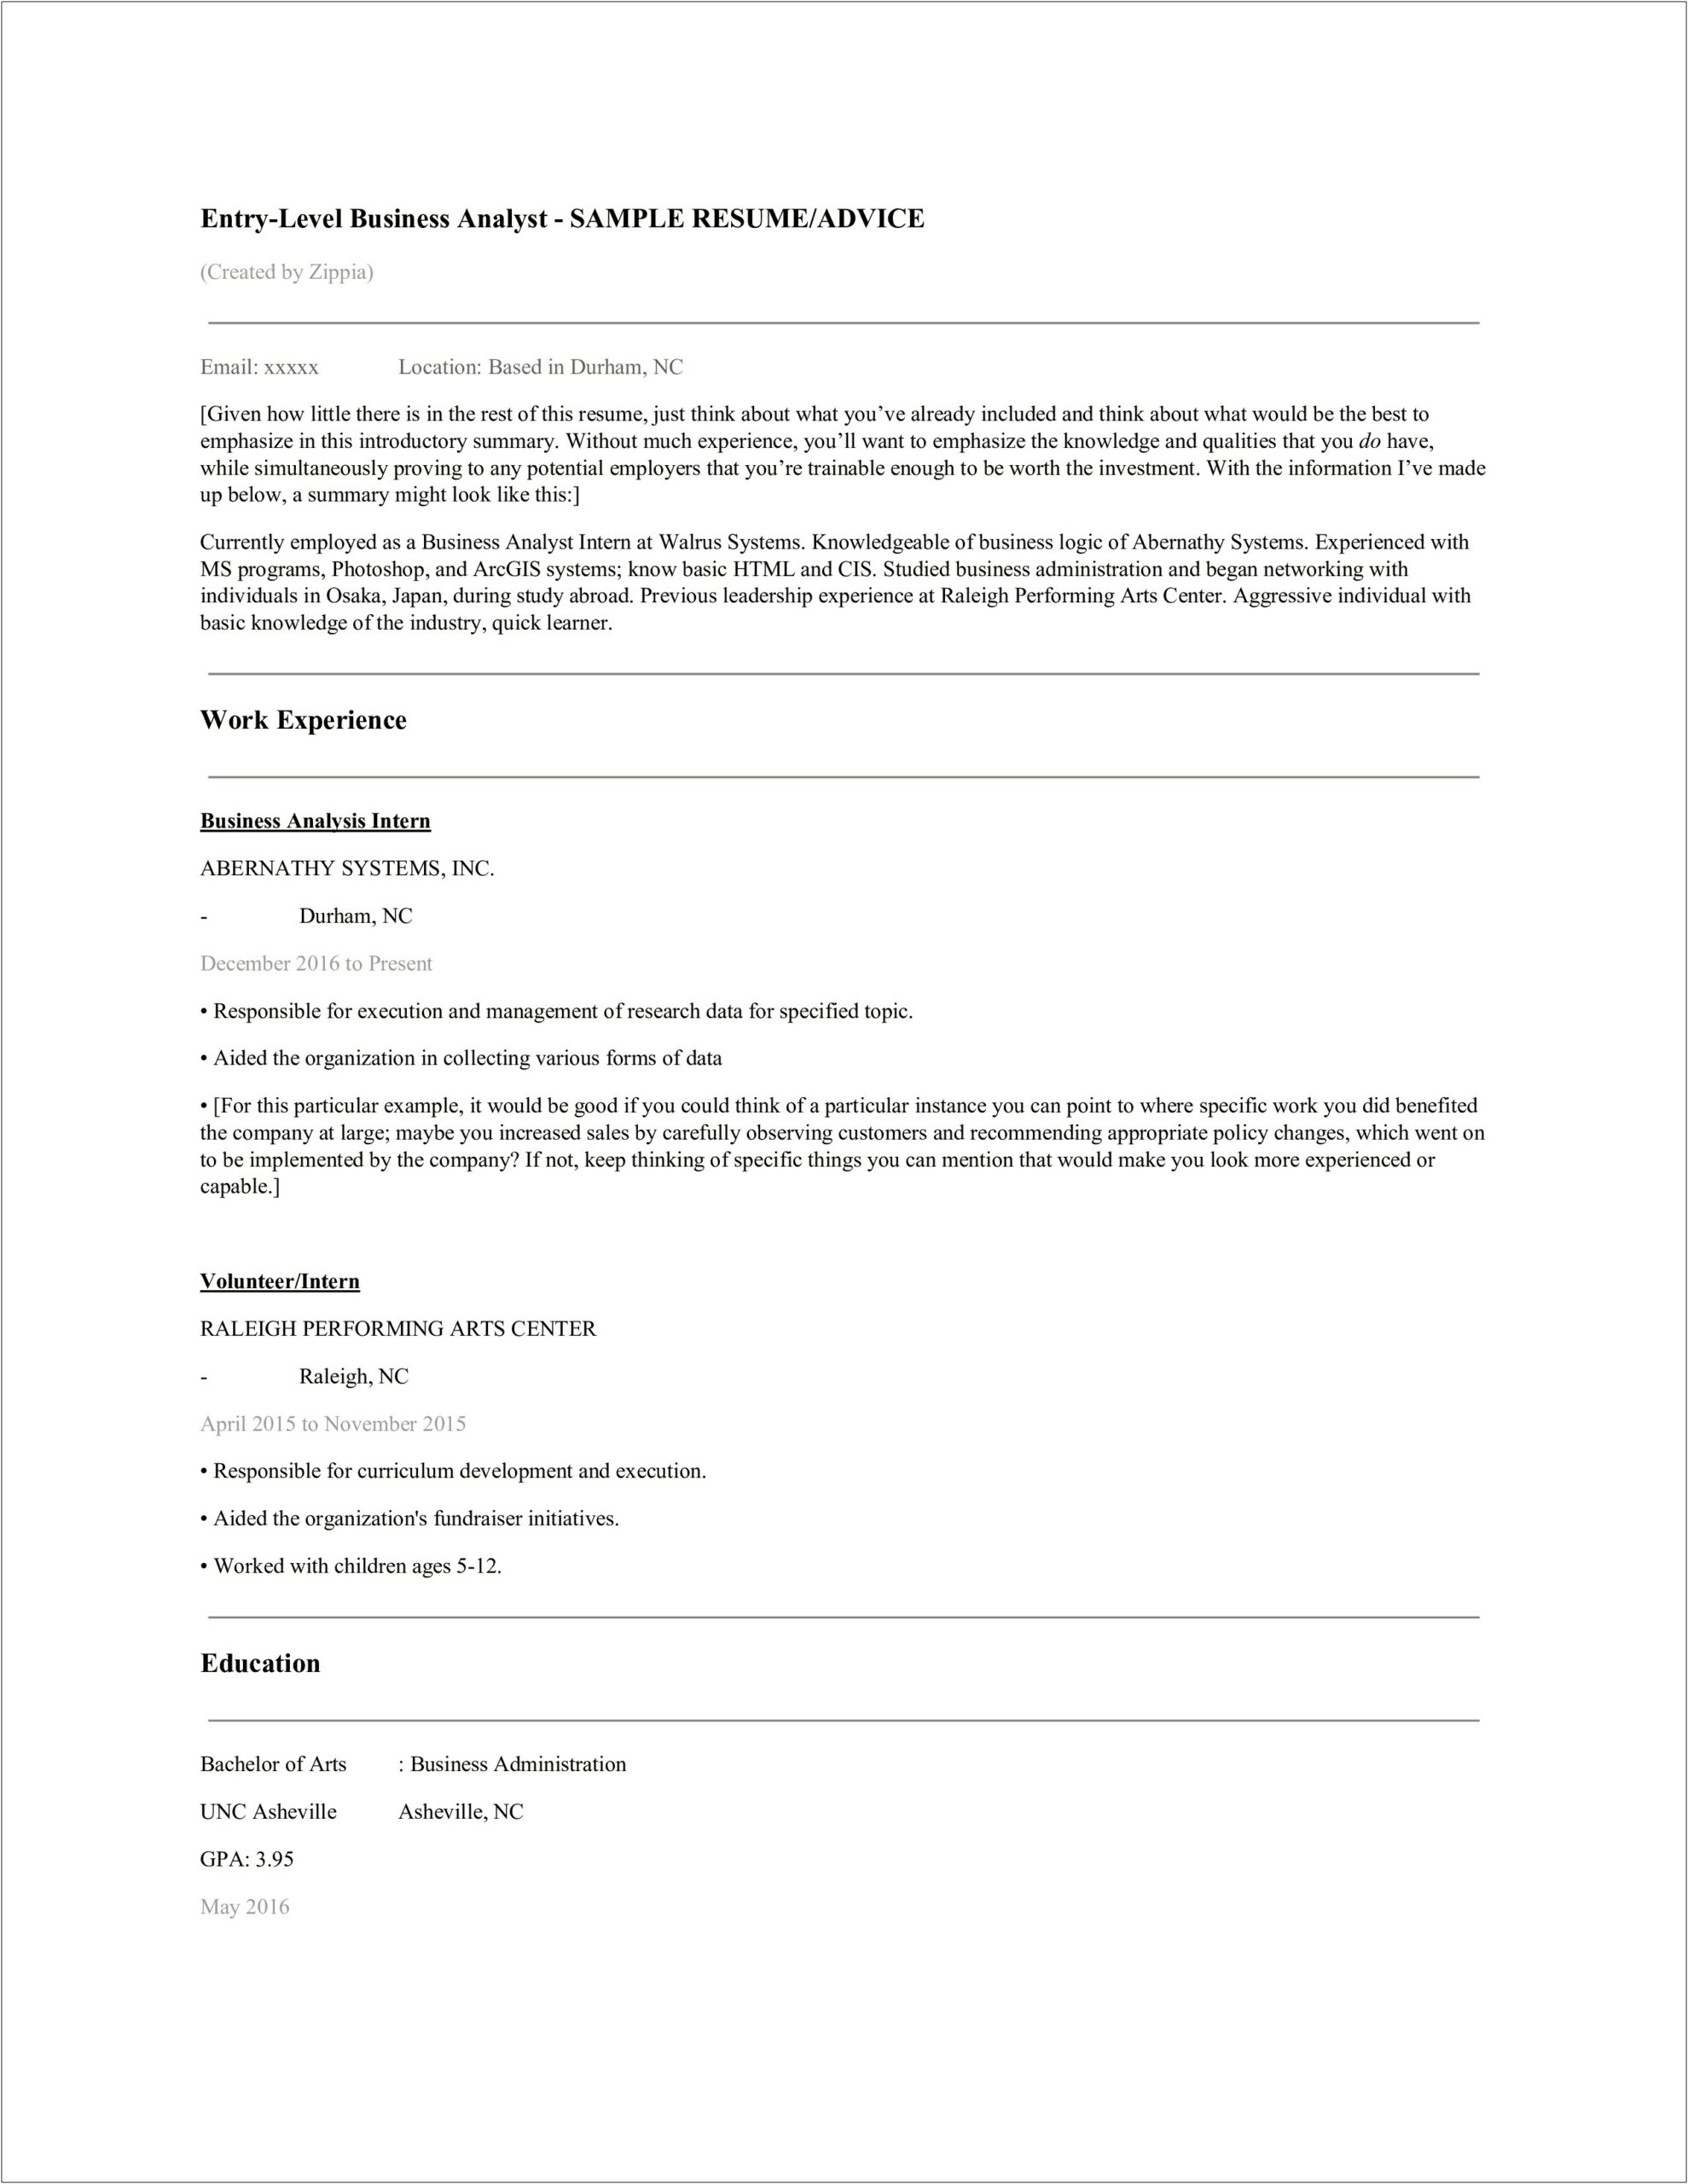 Writing A Good Resume For Business Systems Analyst